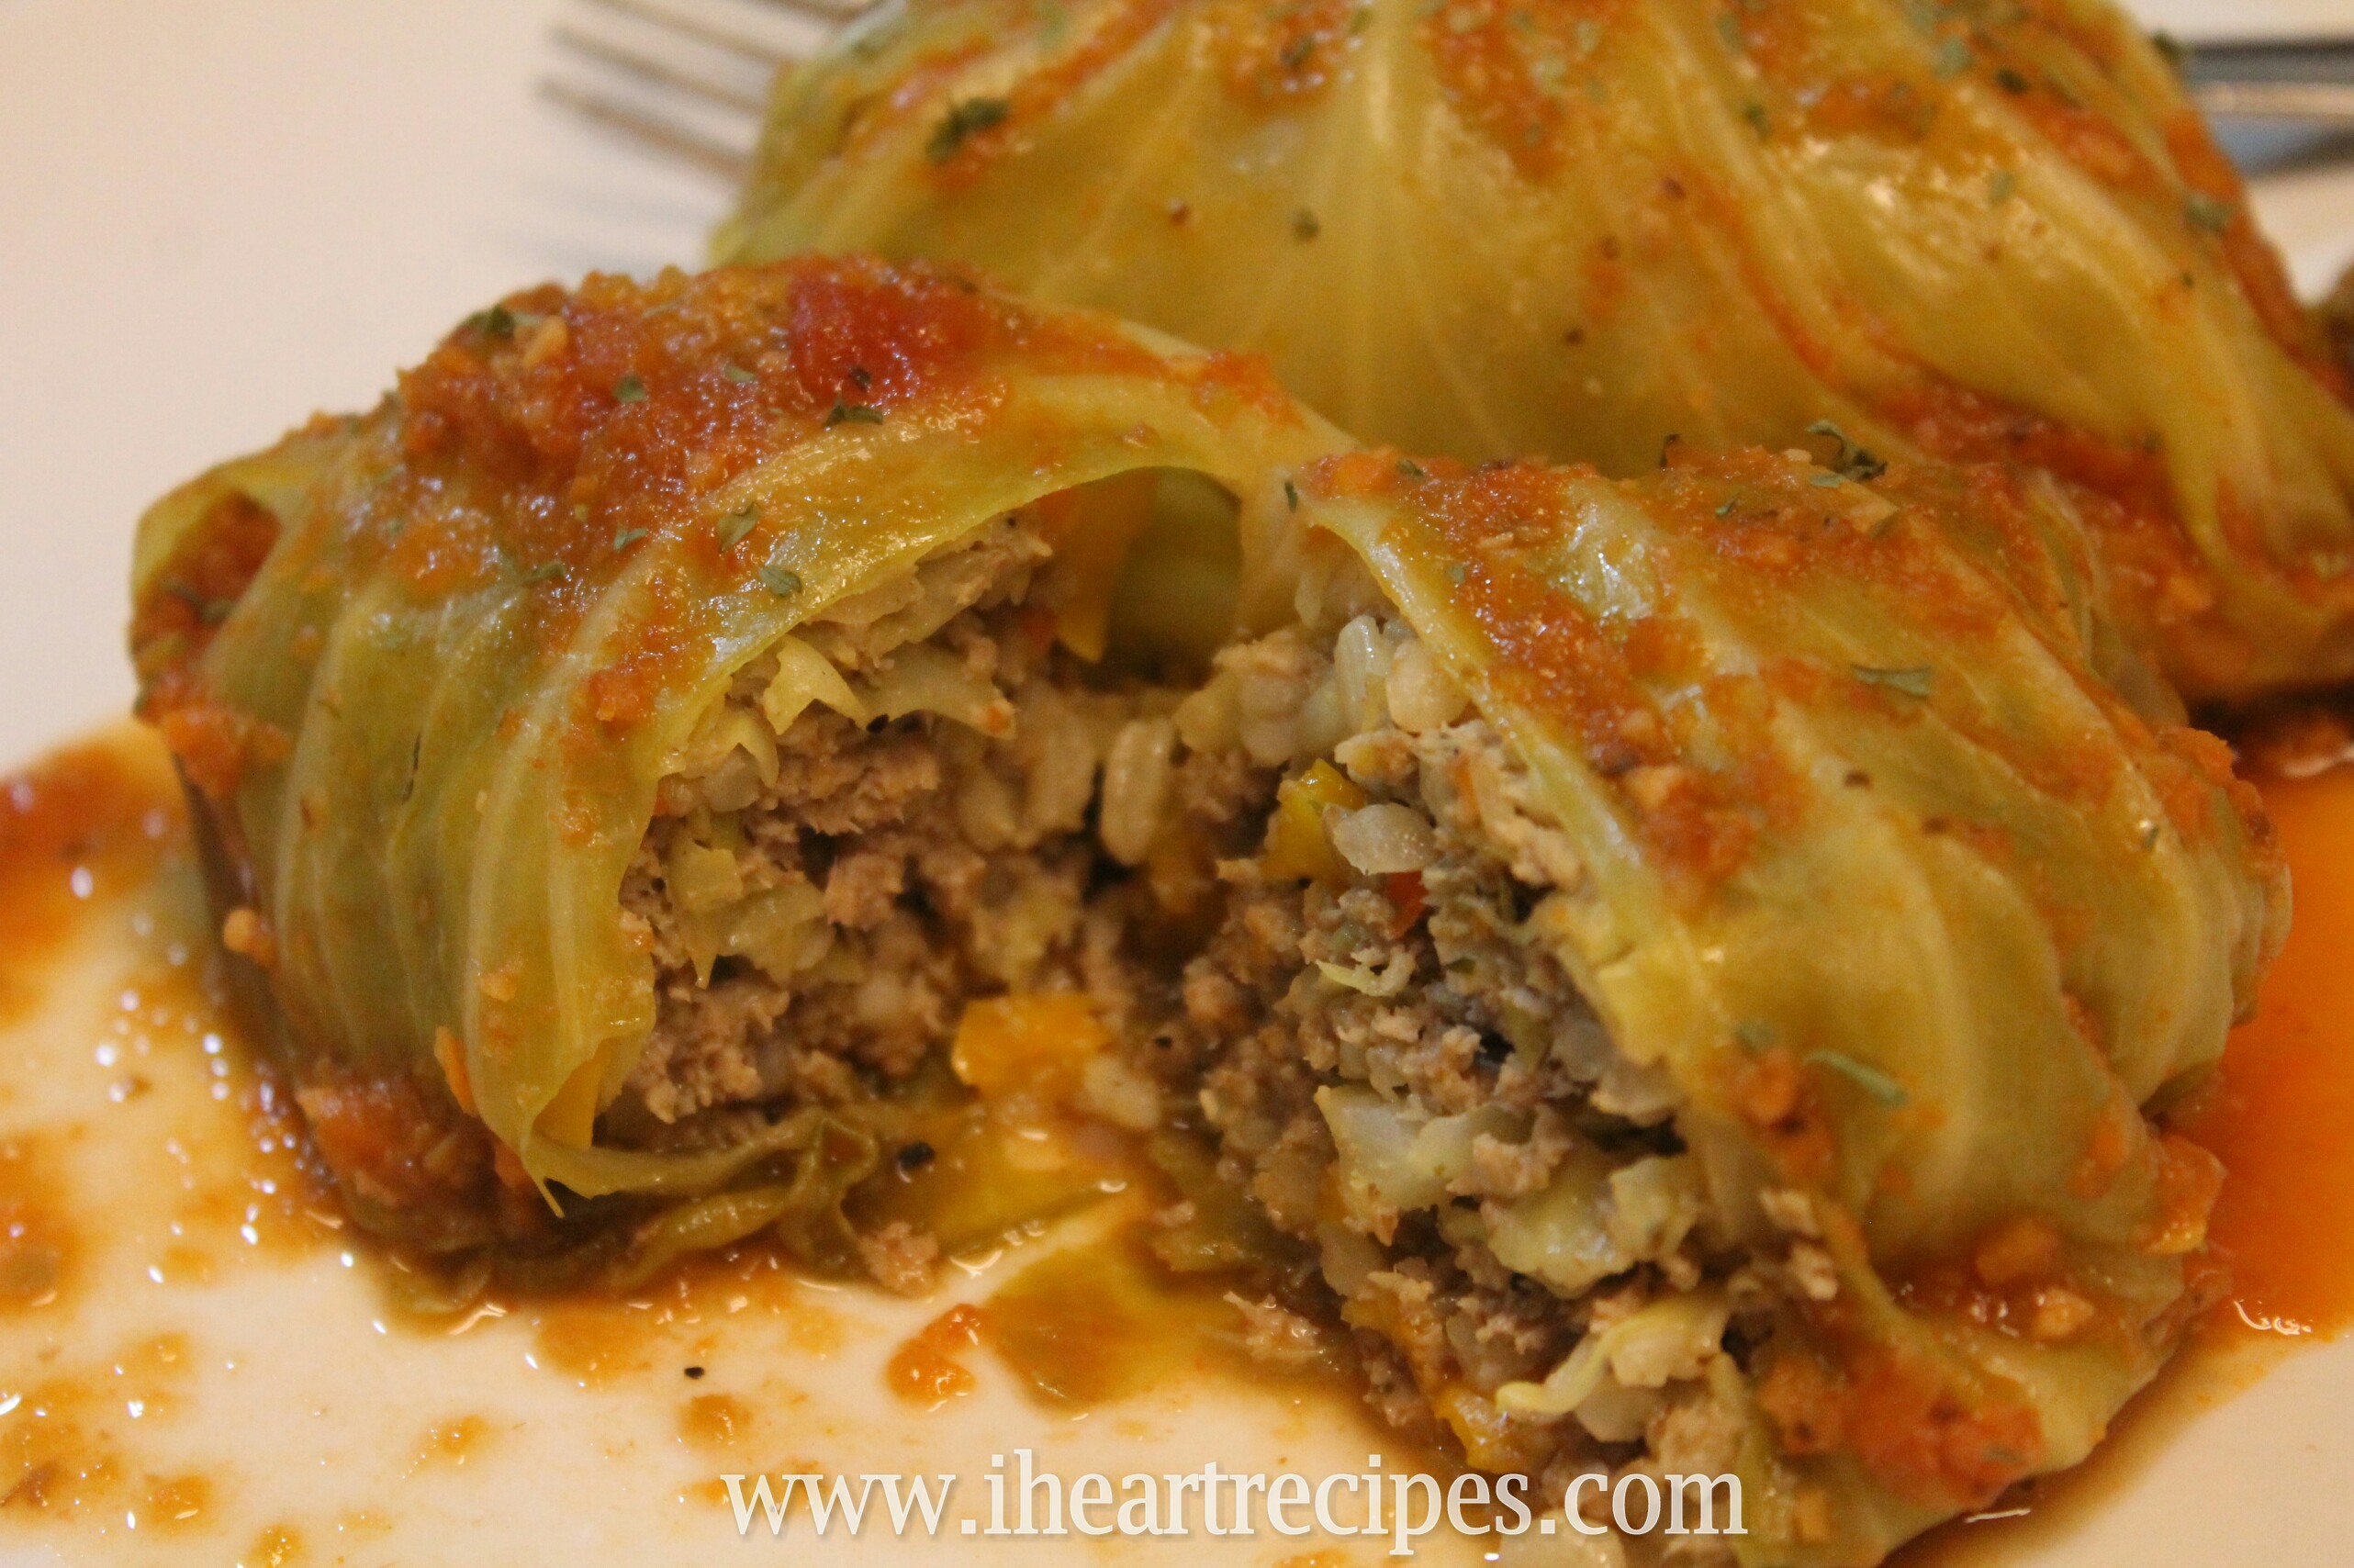 Two stuffed cabbage rolls covered in tomato sauce sit on a white plate. One cabbage roll is cut open, revealing a filling of ground turkey, rice, onions, and peppers.